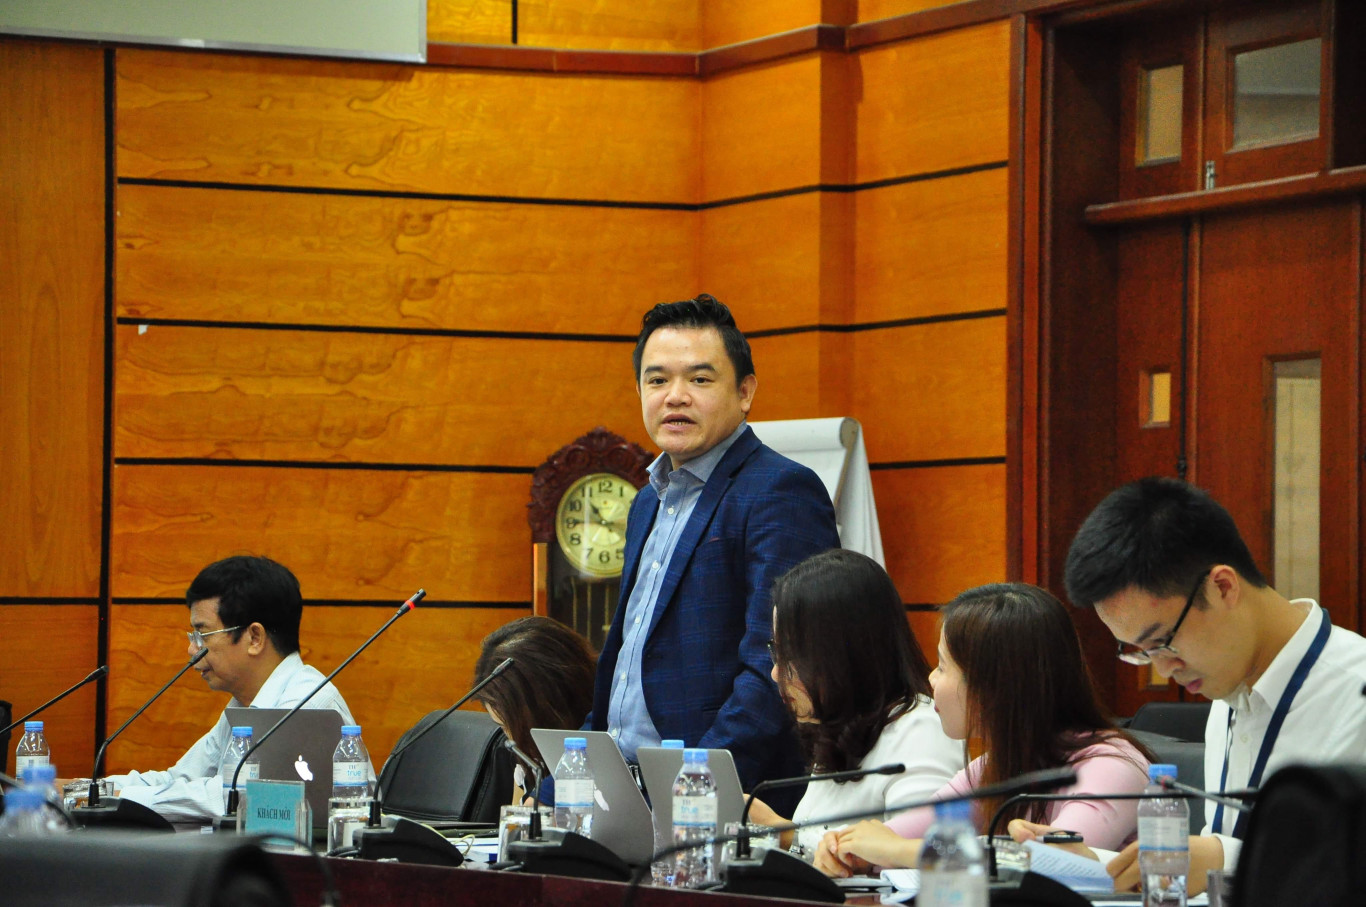 Lawyer Pham Duy Khuong presented at the Seminar on  CPTPP: Commitments and Enforcement held by Hanoi Law University